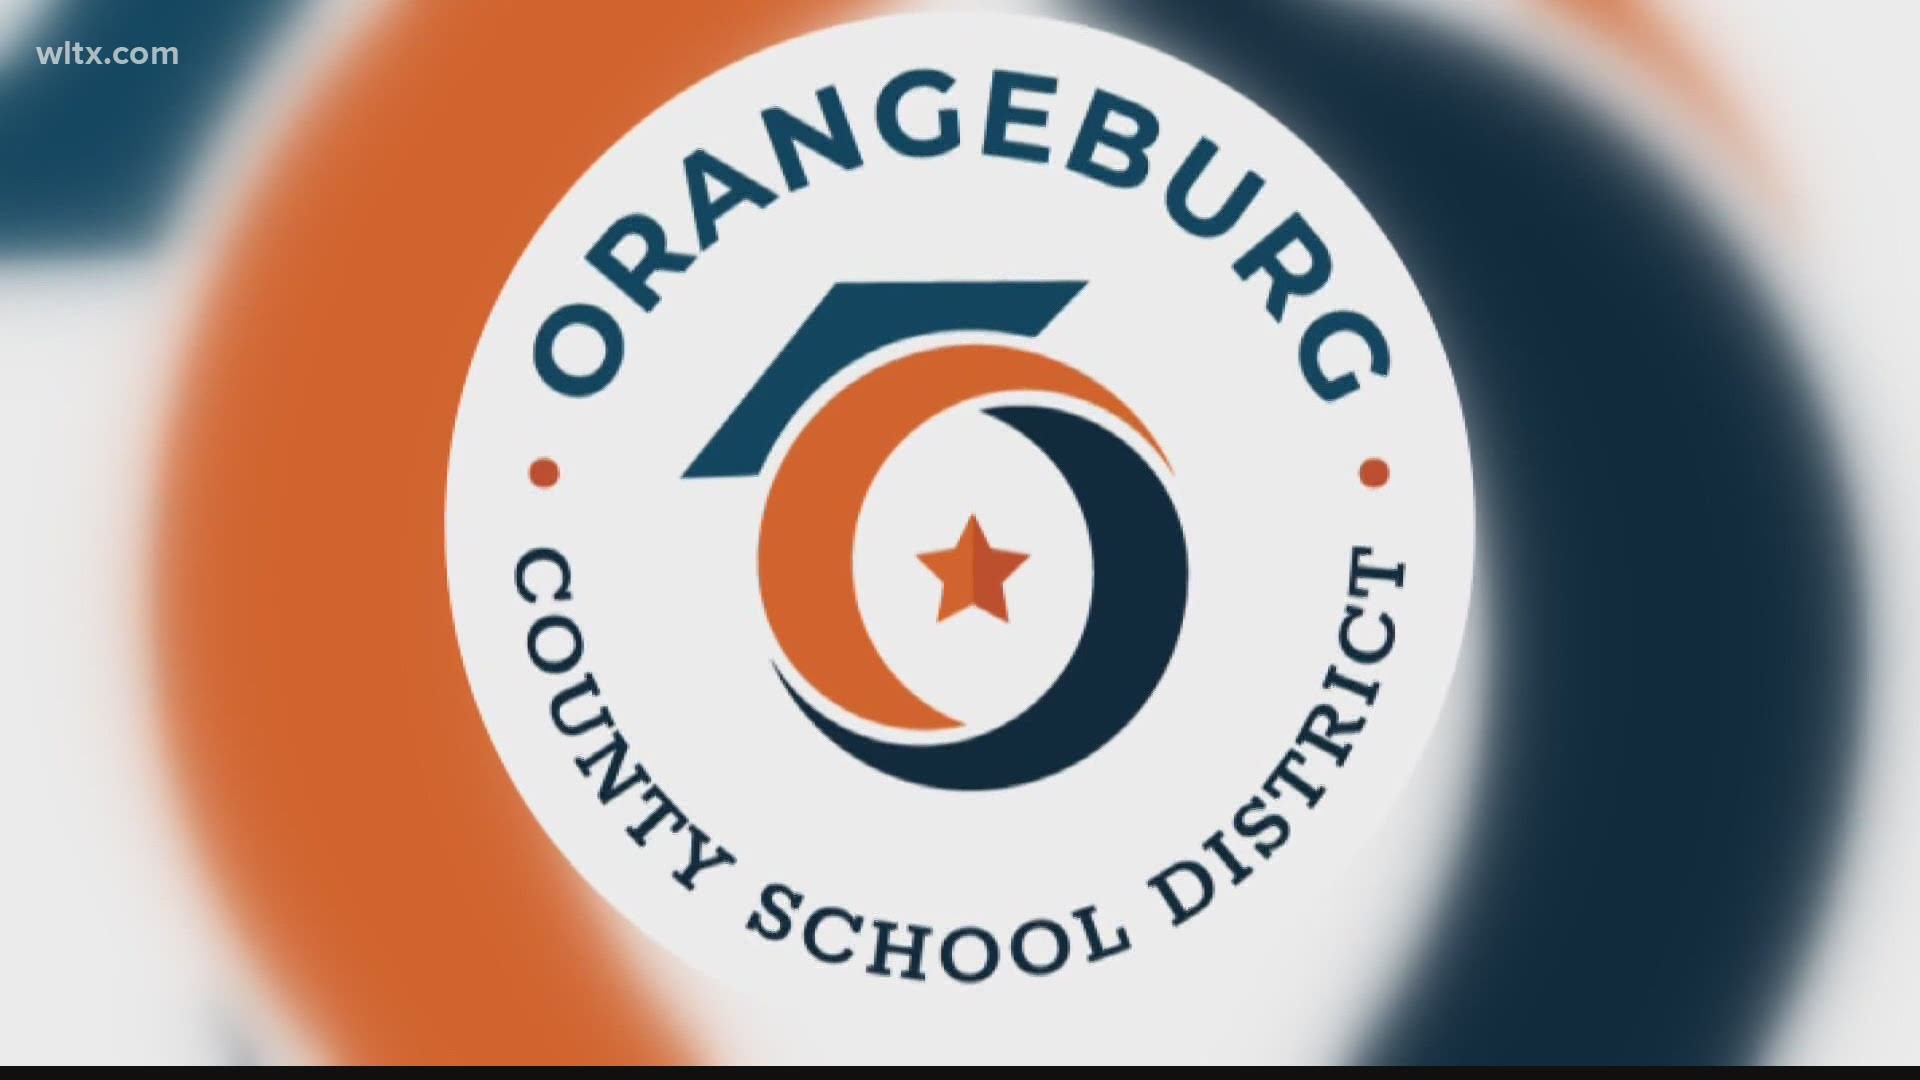 Orangeburg County public schools will continue virtual learning through the end of January due to COVID-19, according to officials.